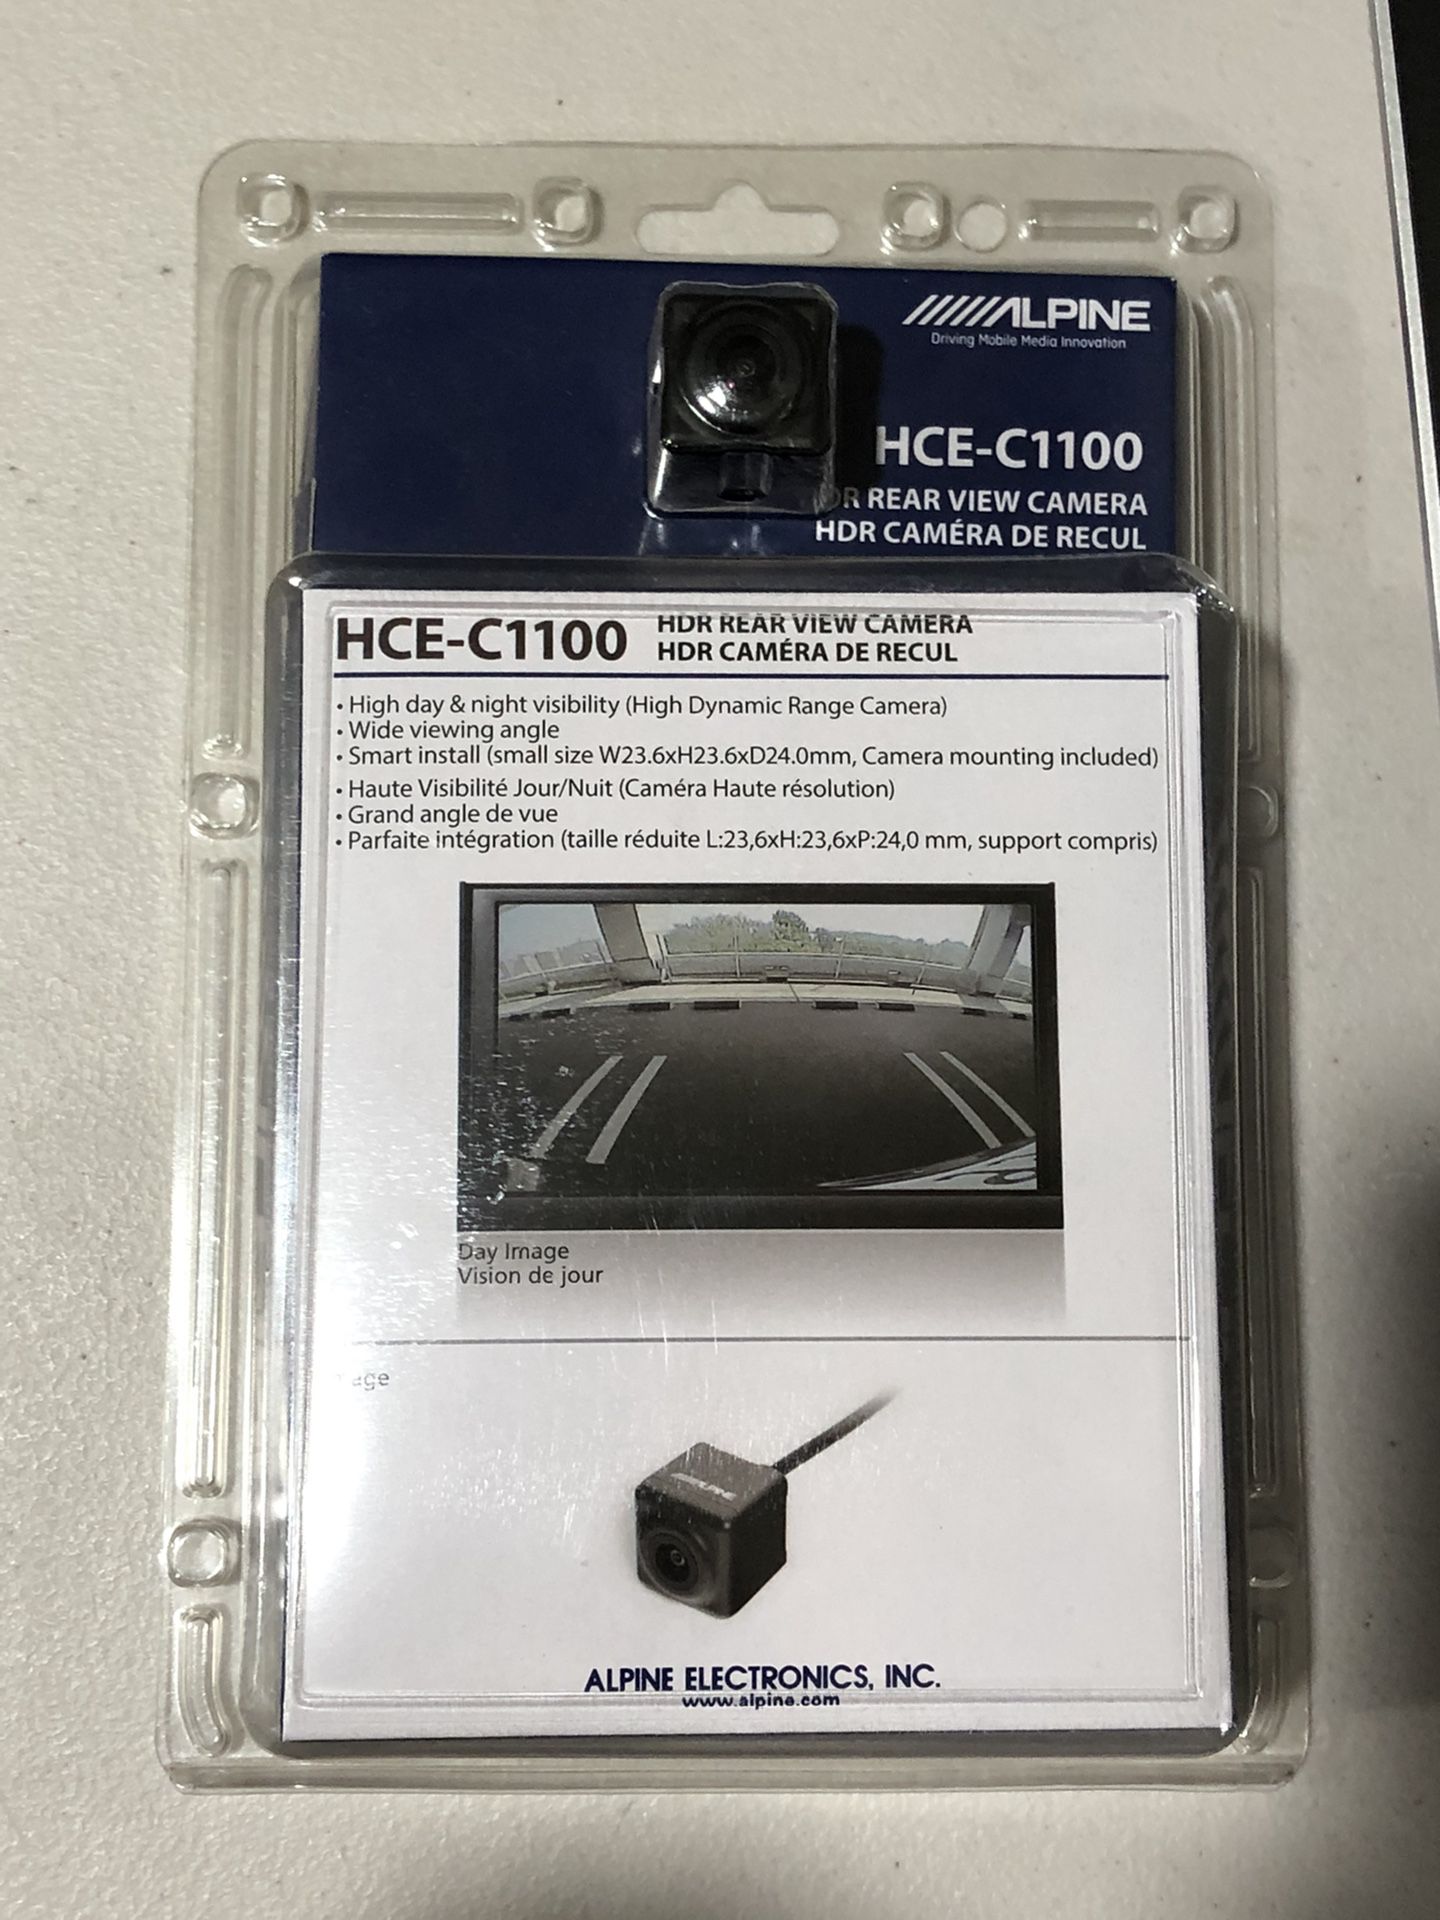 Alpine HCE-C1100 HDR Rear Riew Camera